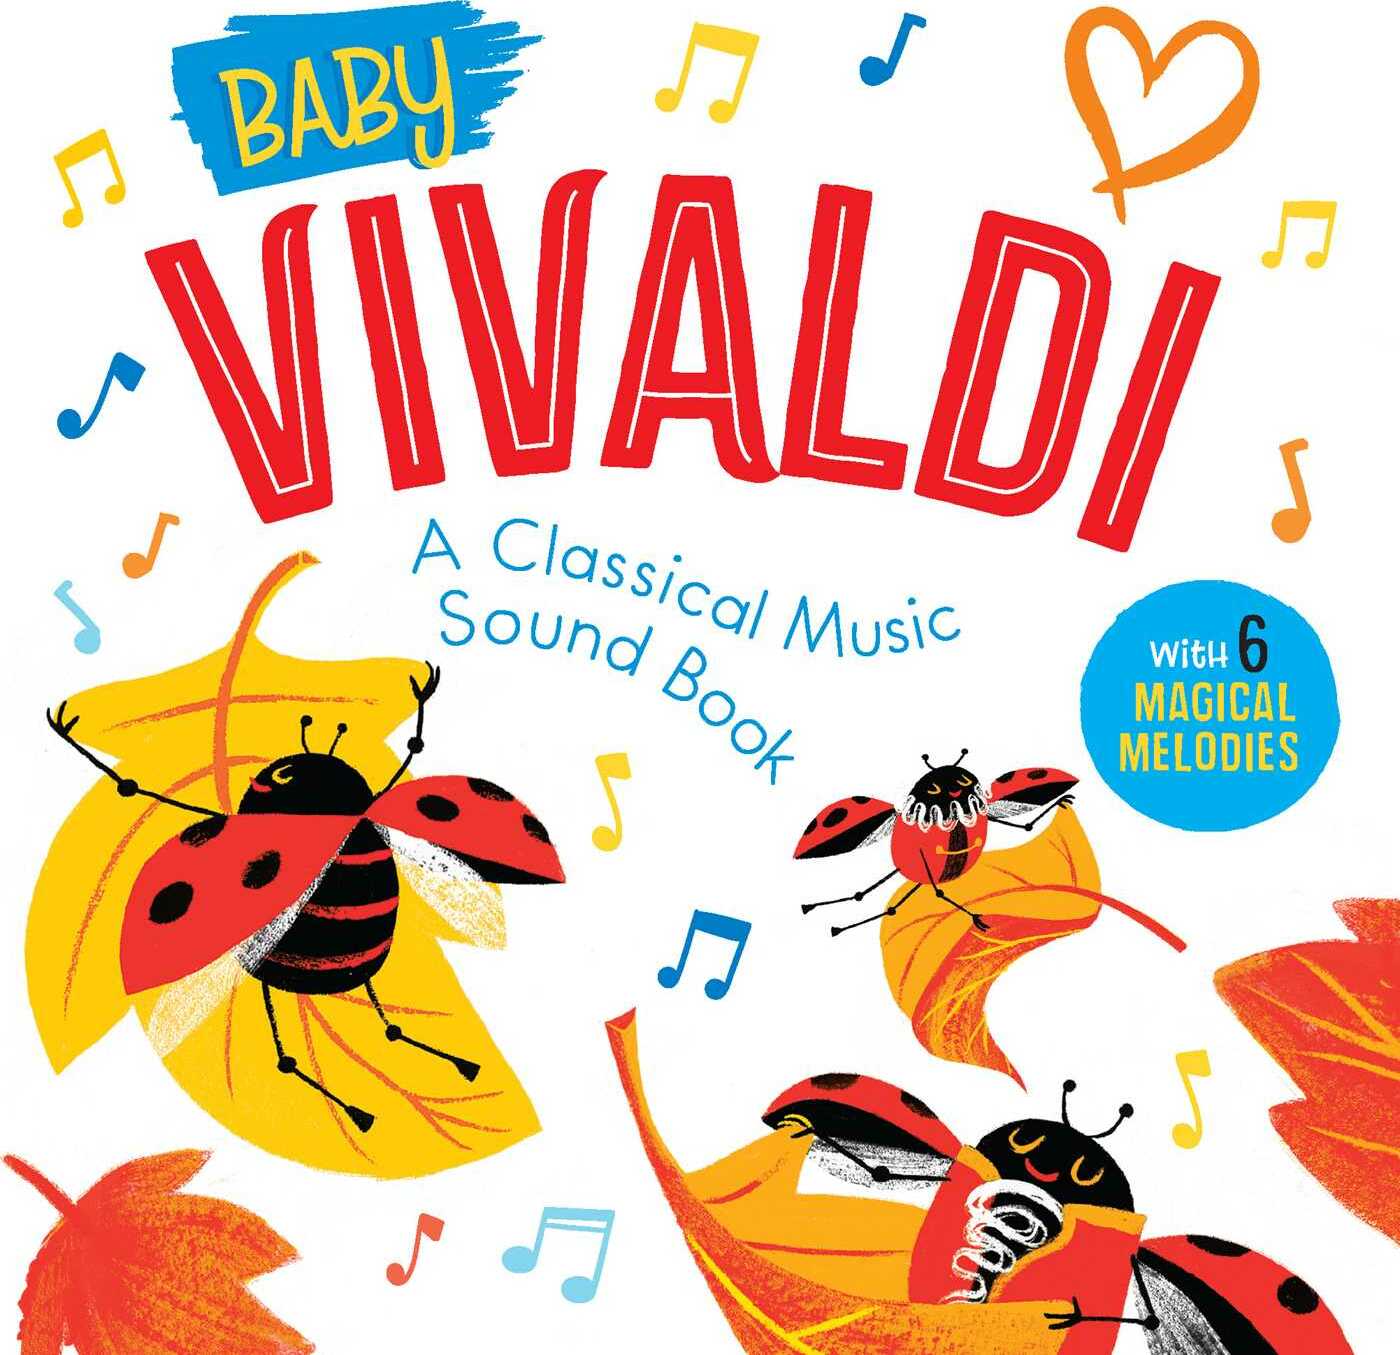 Baby Vivaldi: A Classical Music Sound Book (With 6 Magical Melodies)